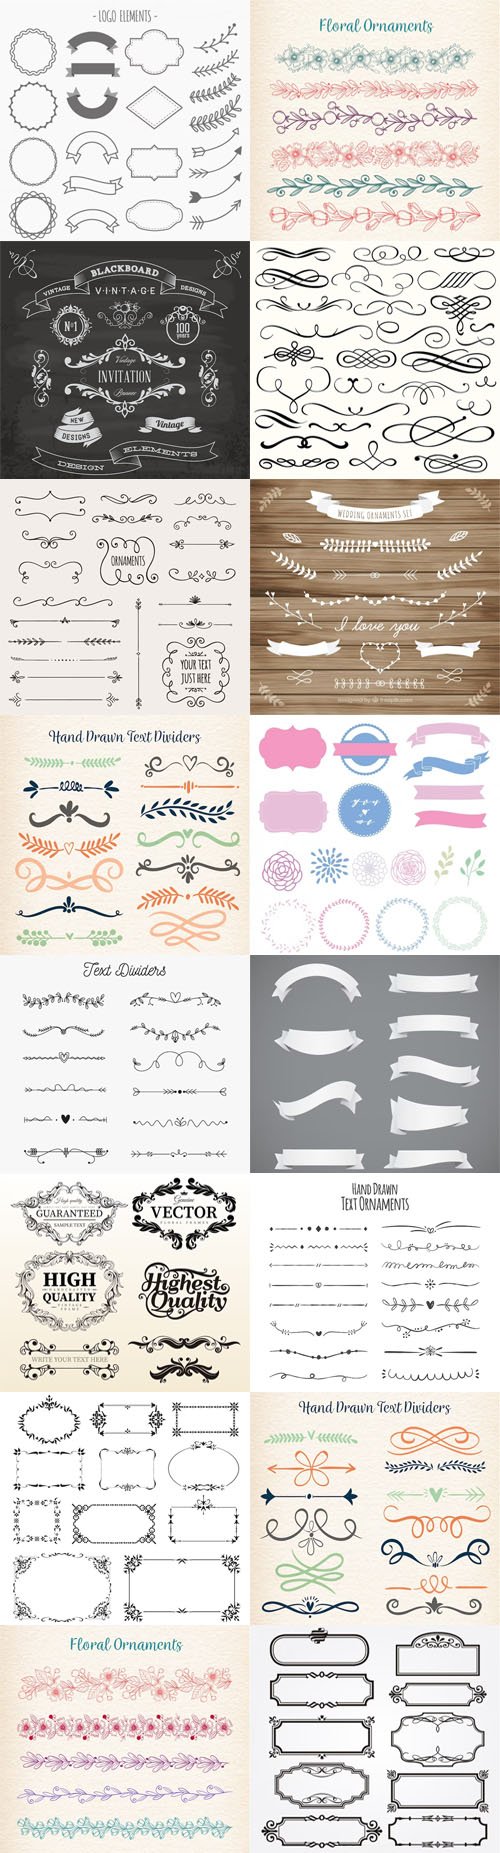 Ornaments - 20 Vector Design Graphics Collection